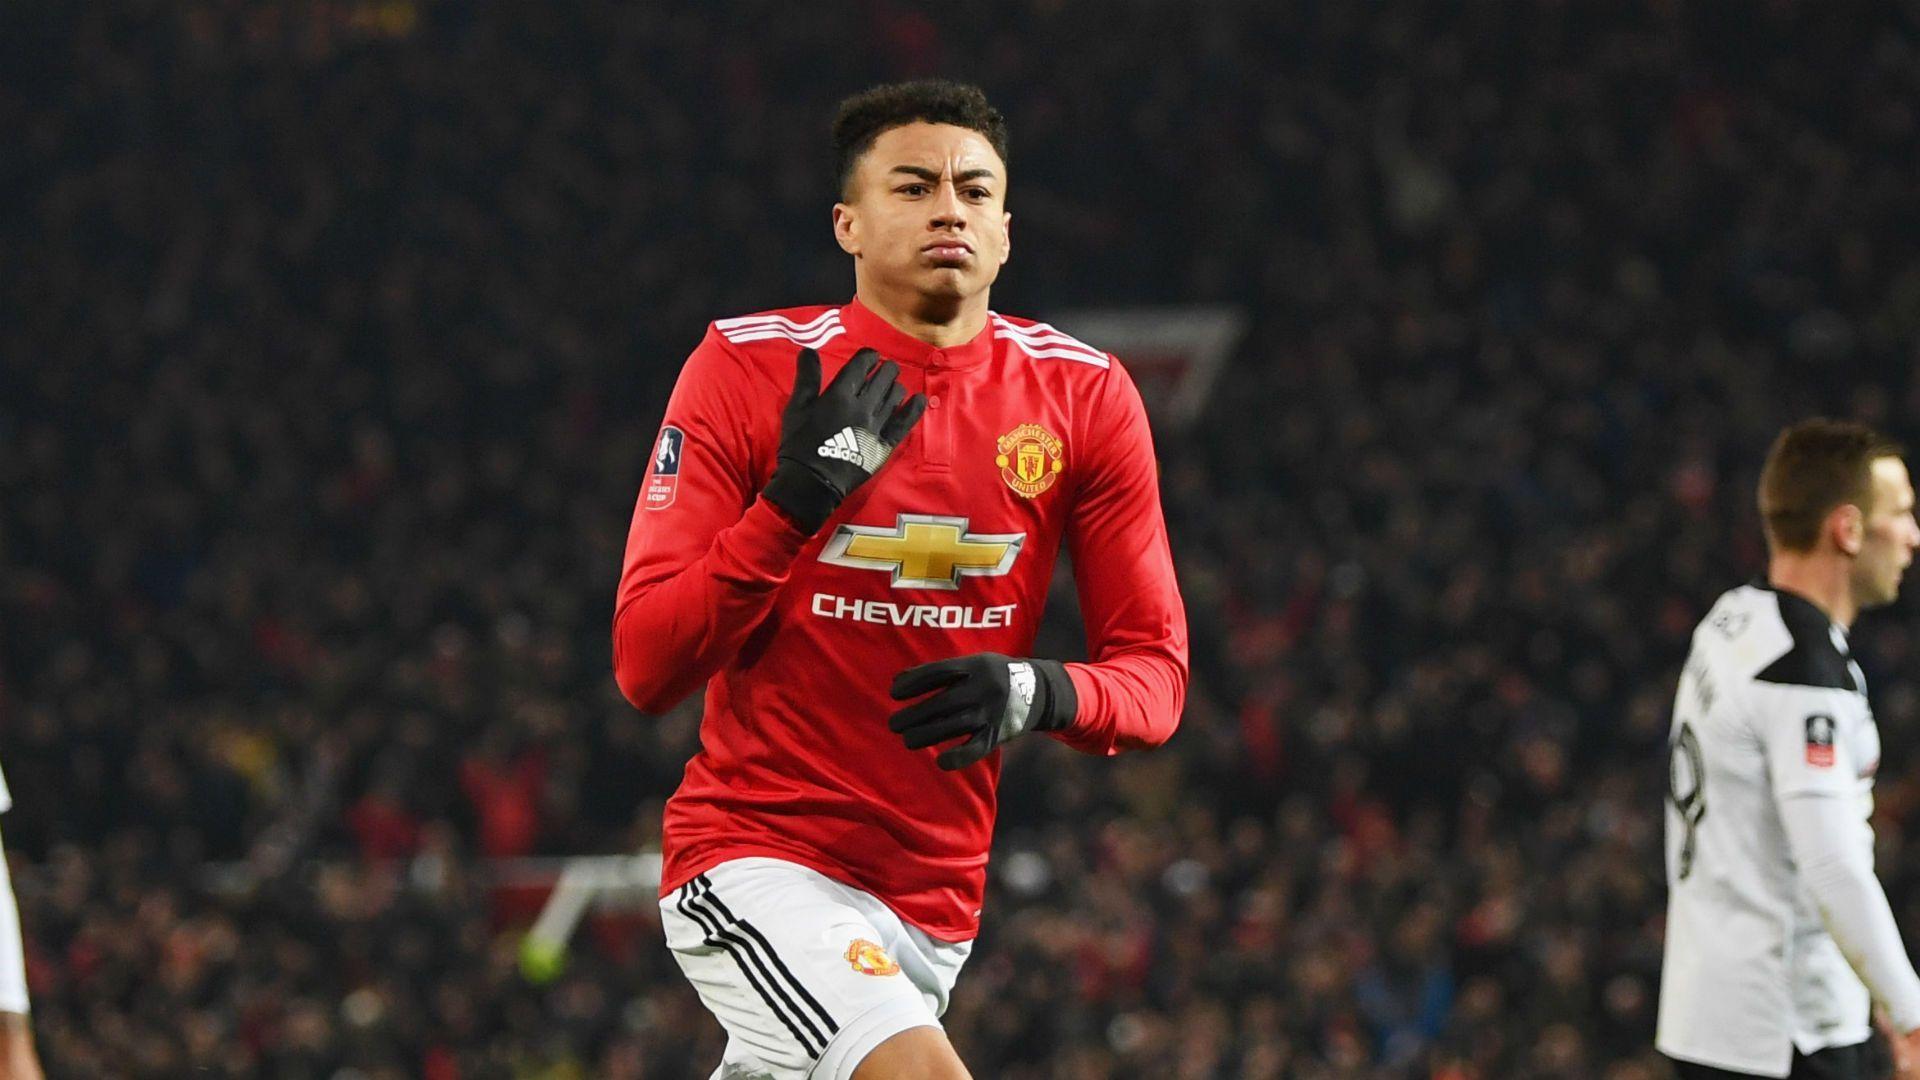 Lingard confident of victory in Manchester derby